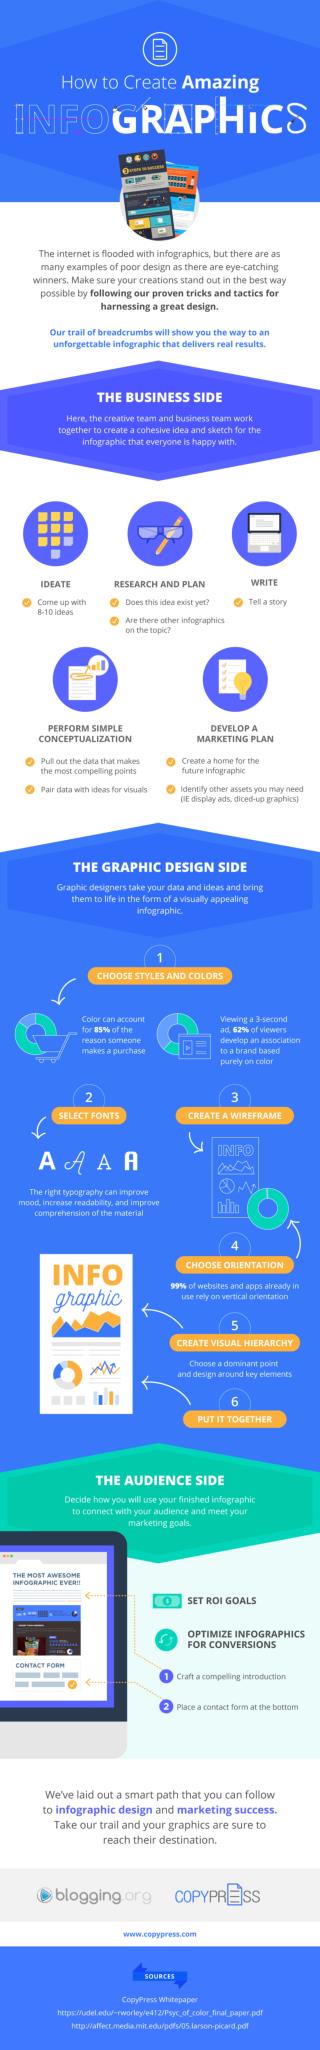 How to Create Compelling Infographics